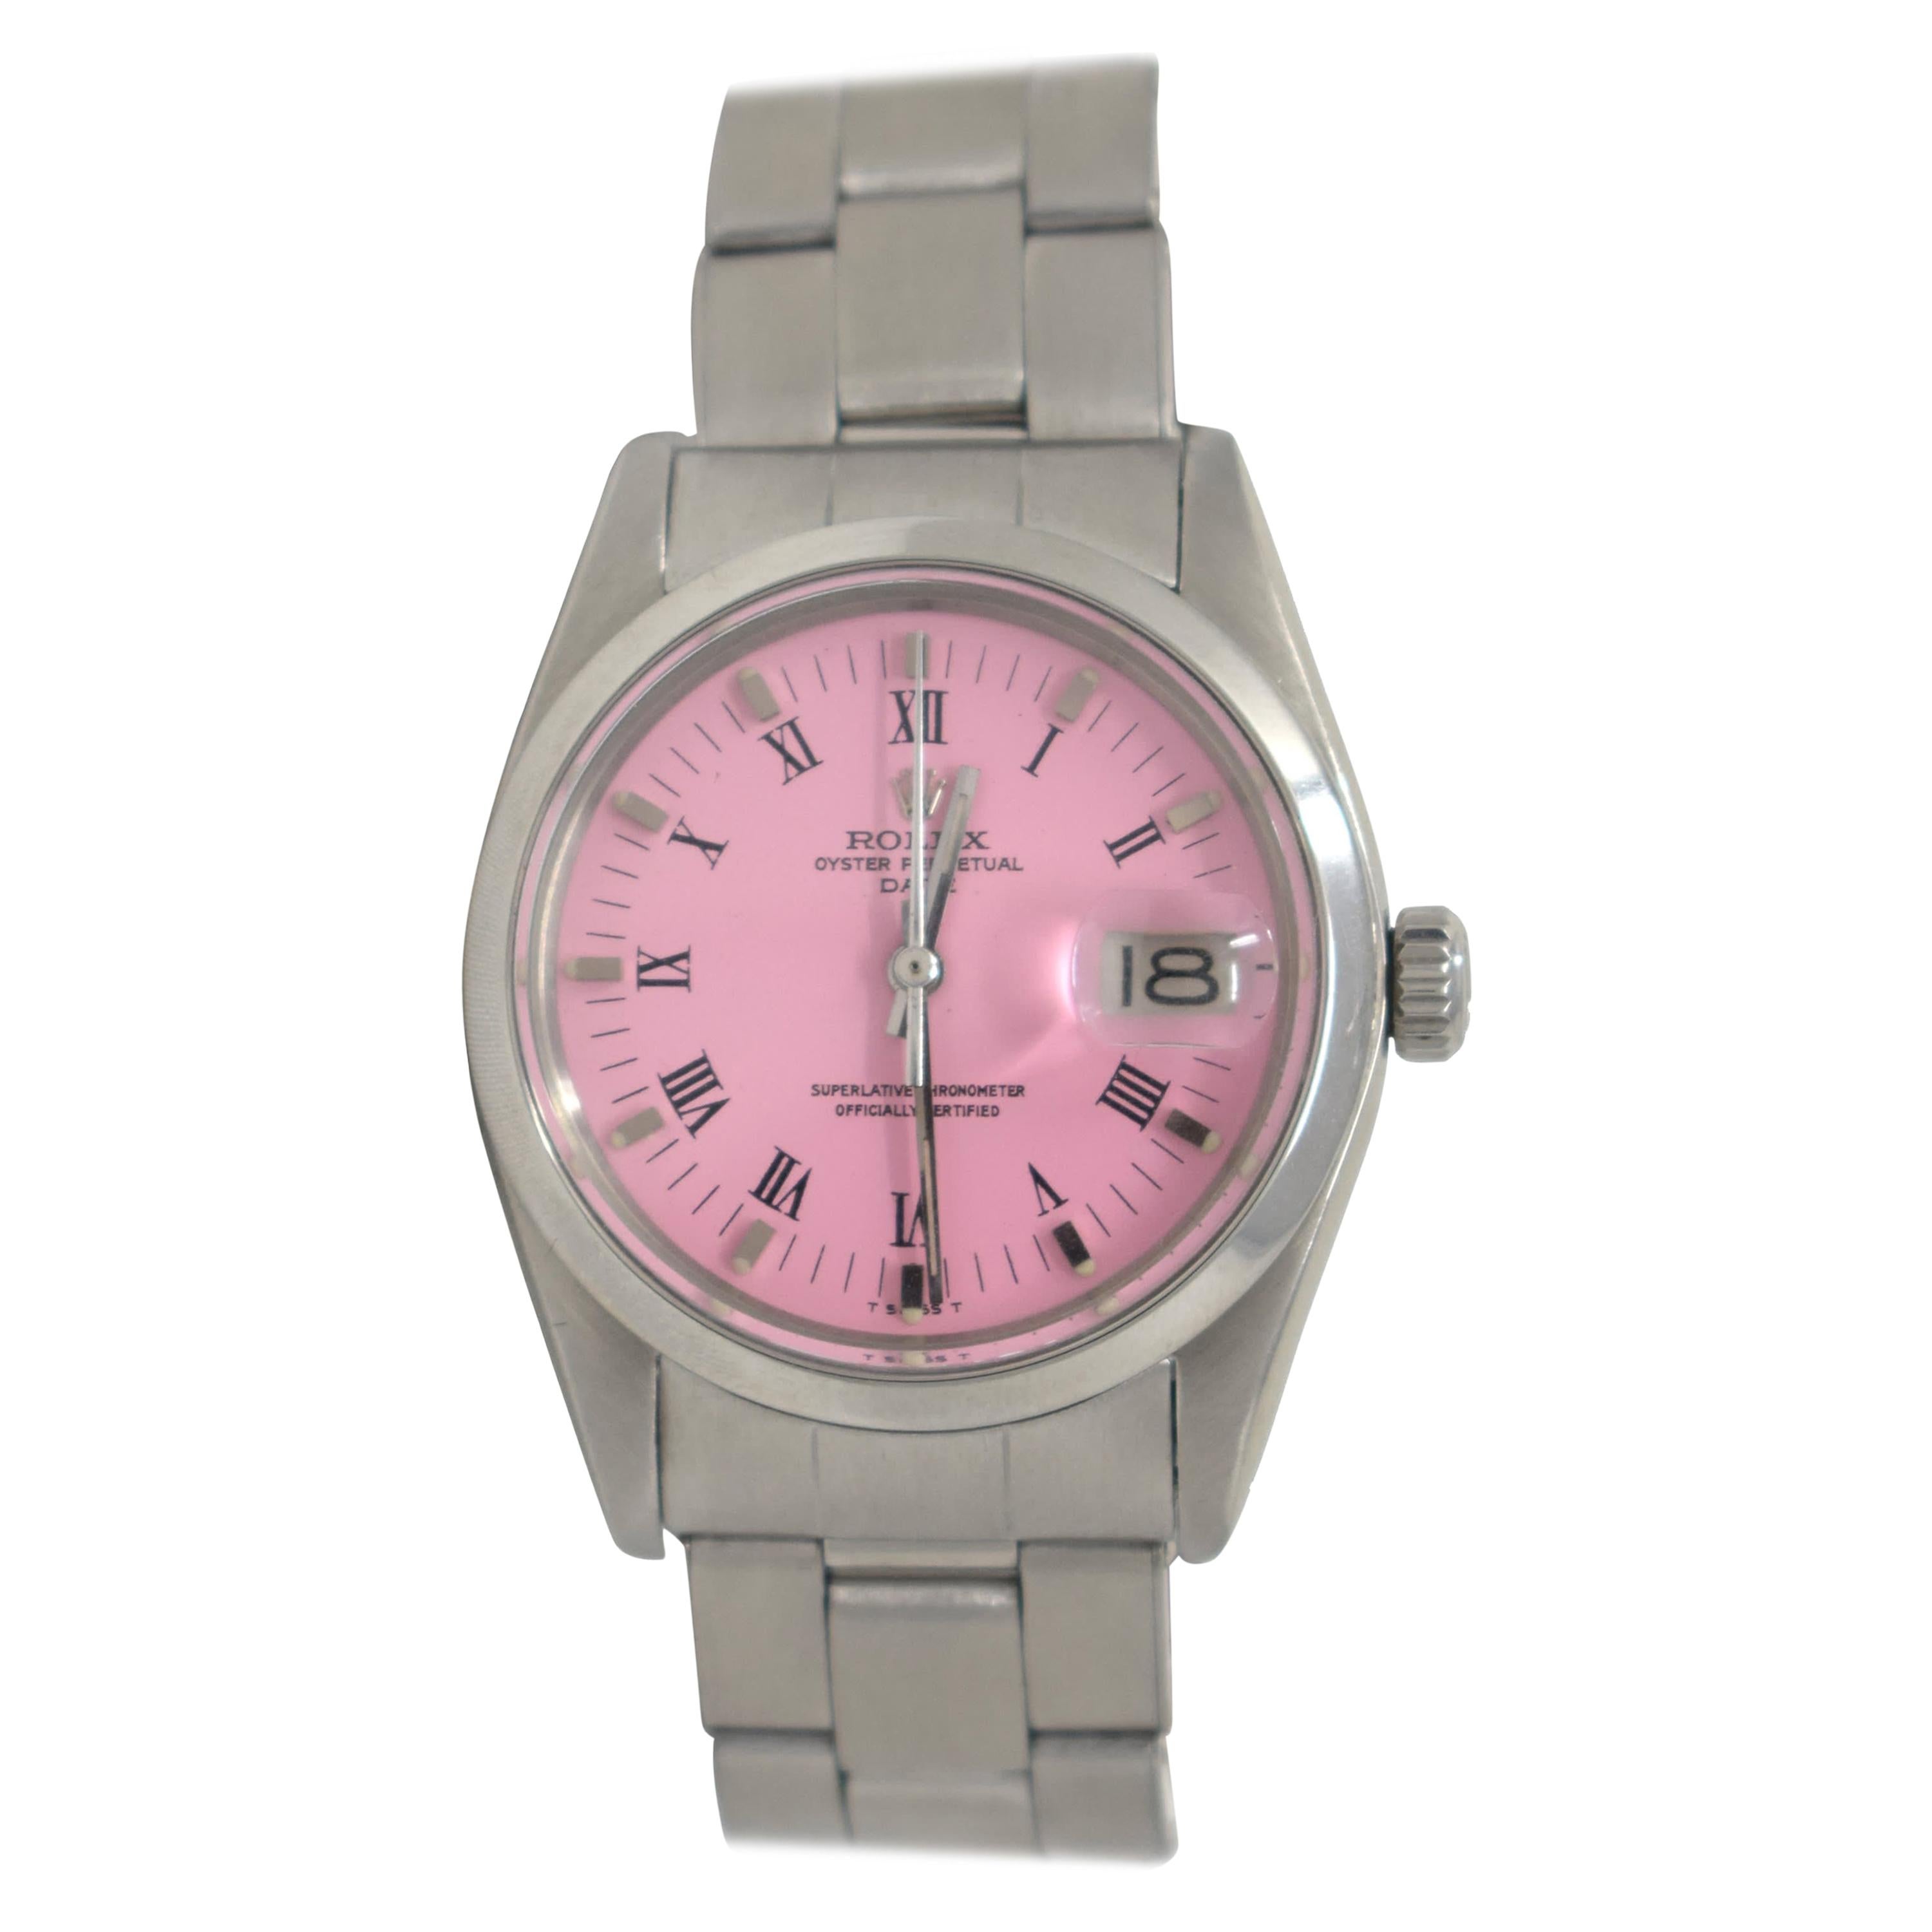 Vintage Rolex Date Automatic Ref. 1500 Pink Dial Roman Numeral Steel Watch